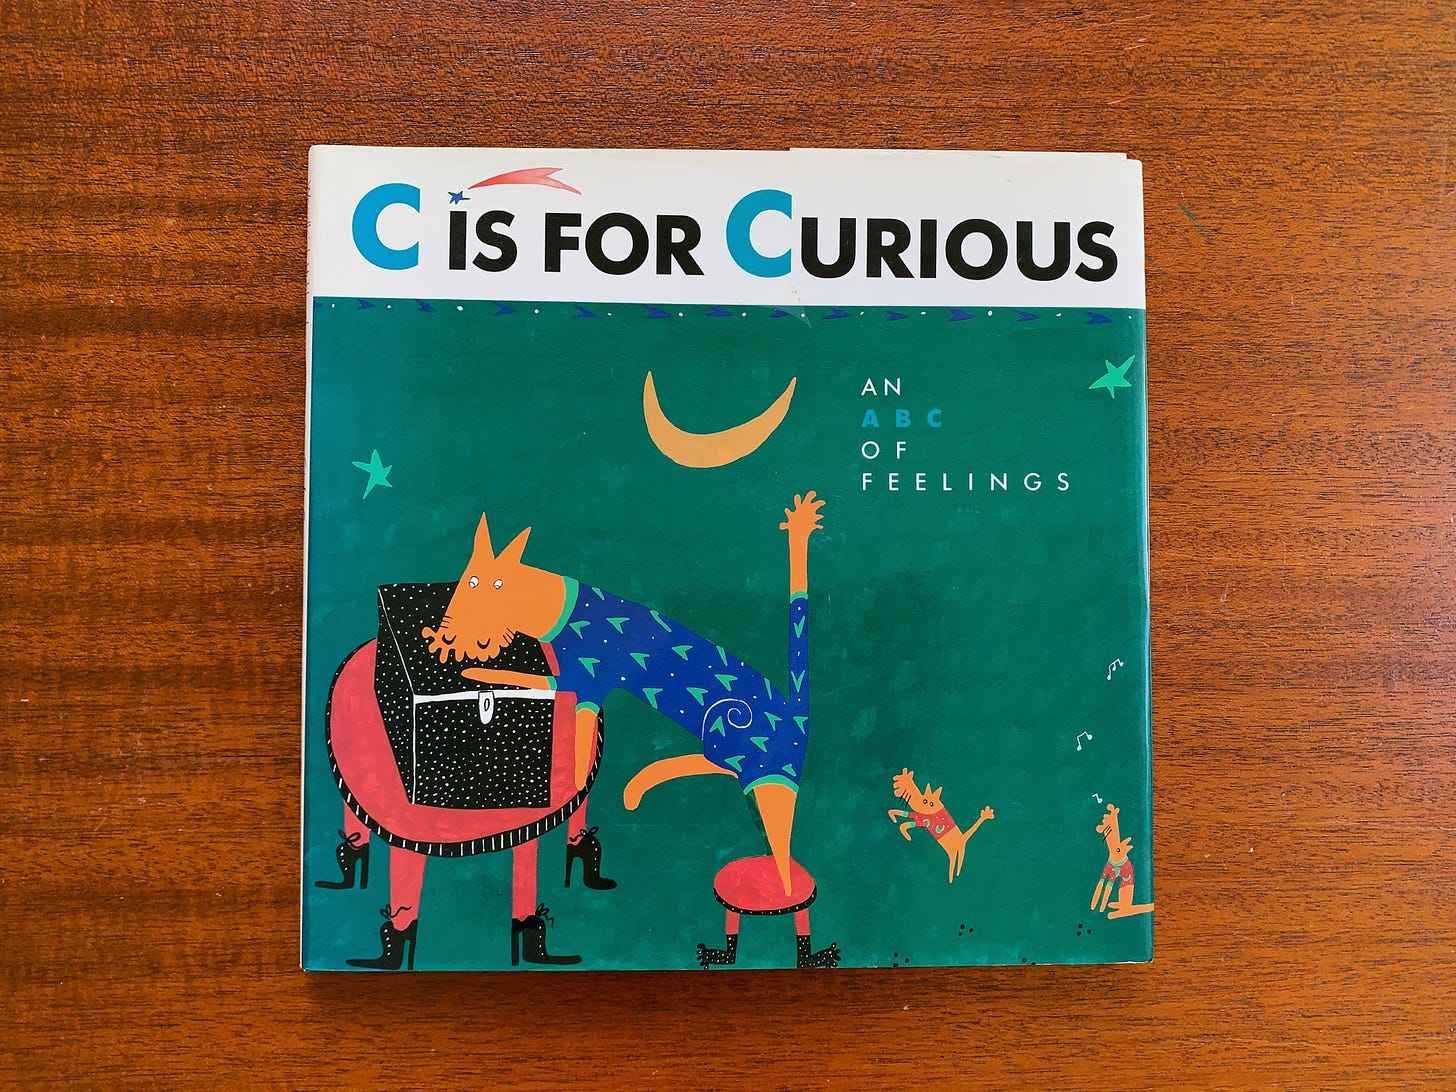 The front cover of "C is for Curious" which has a made up animal that looks like a fox peering into a box.